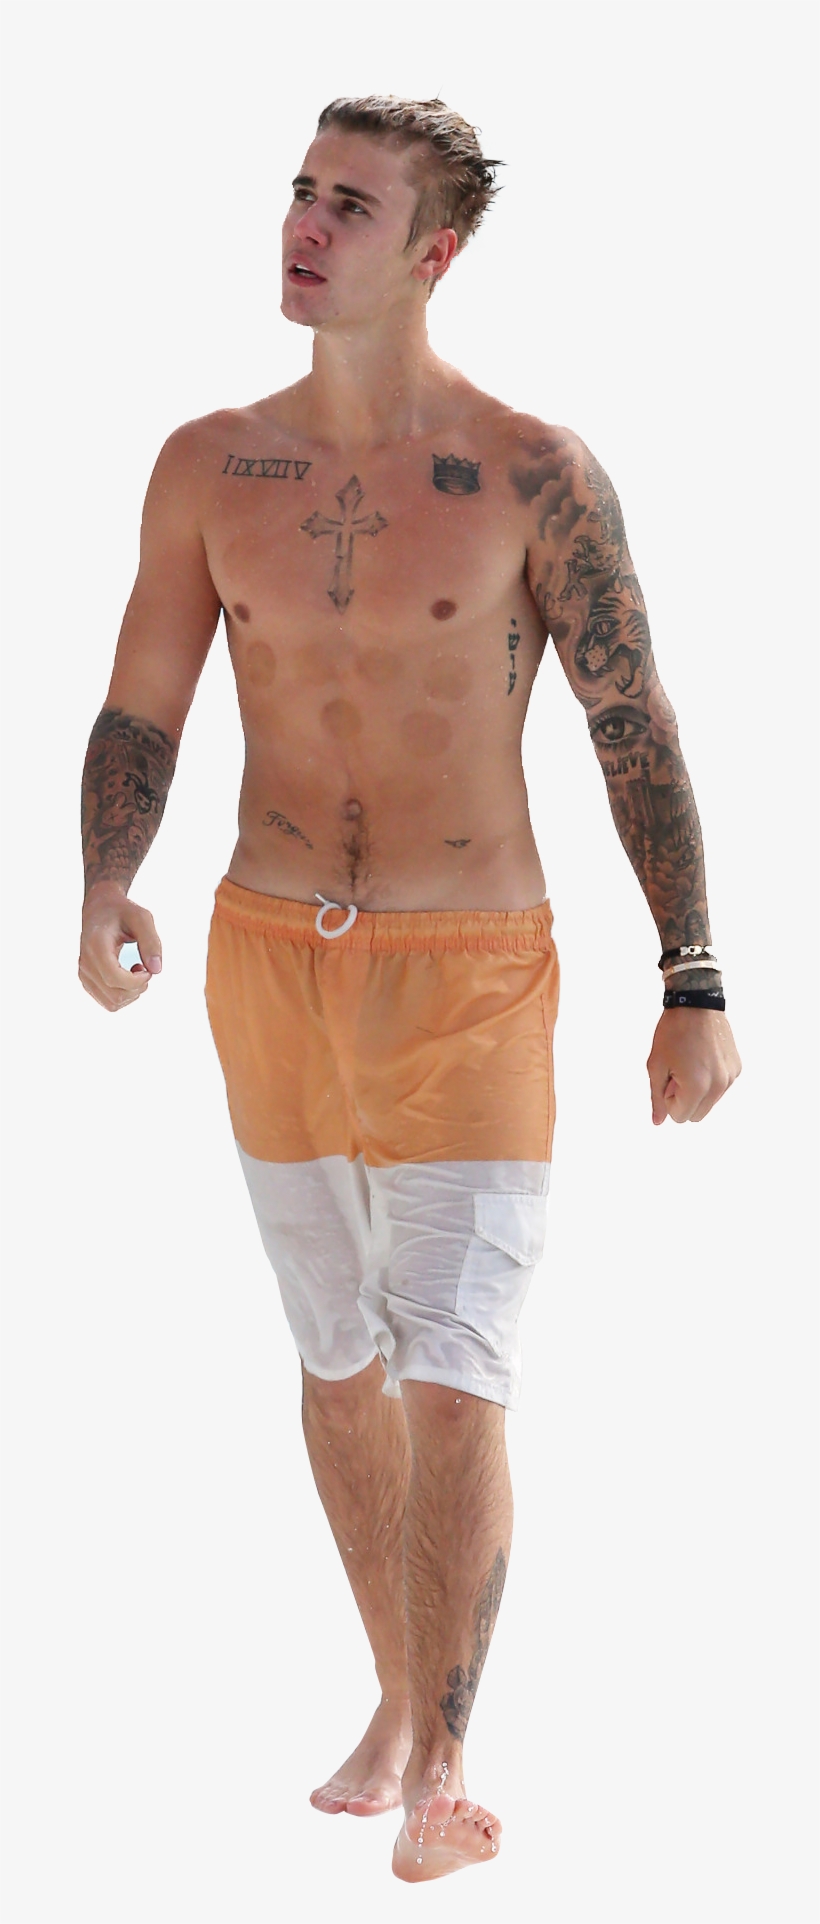 Justin Bieber Topless - Topless People Png, transparent png #8011005